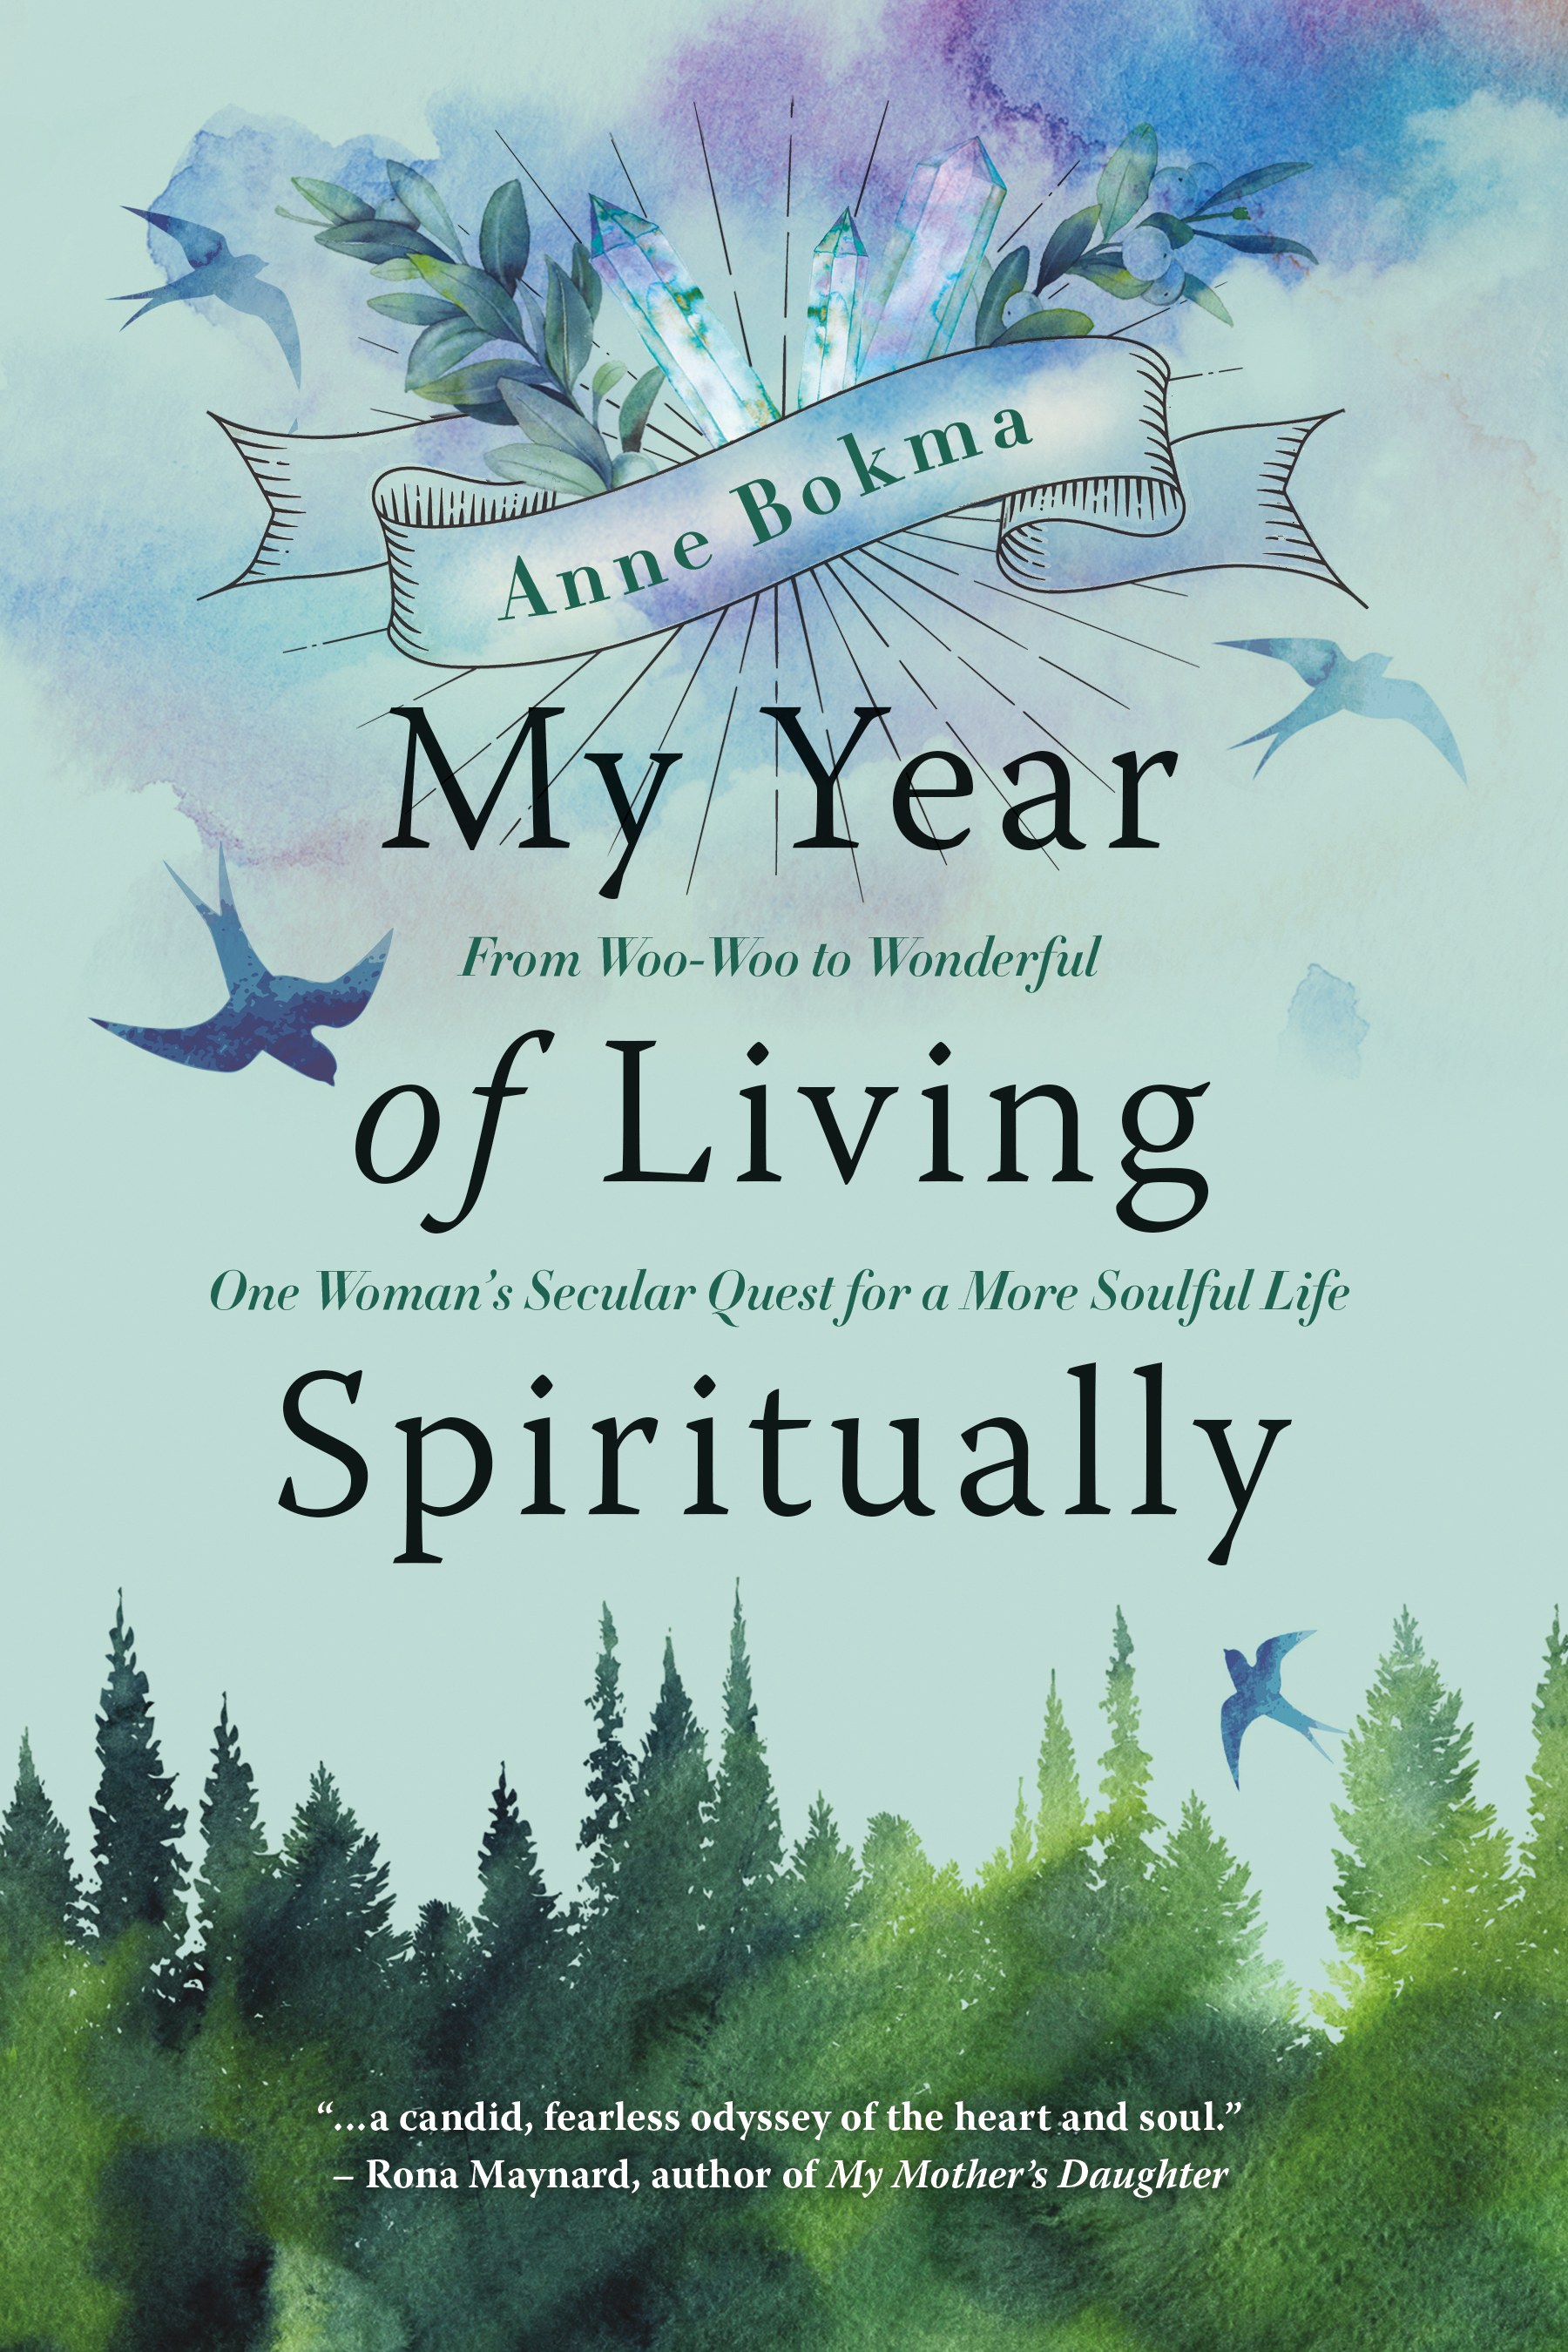 My Year of Living Spiritually : From Woo-Woo to Wonderful--One Woman's Secular Quest for a More Soulful Life | Bokma, Anne